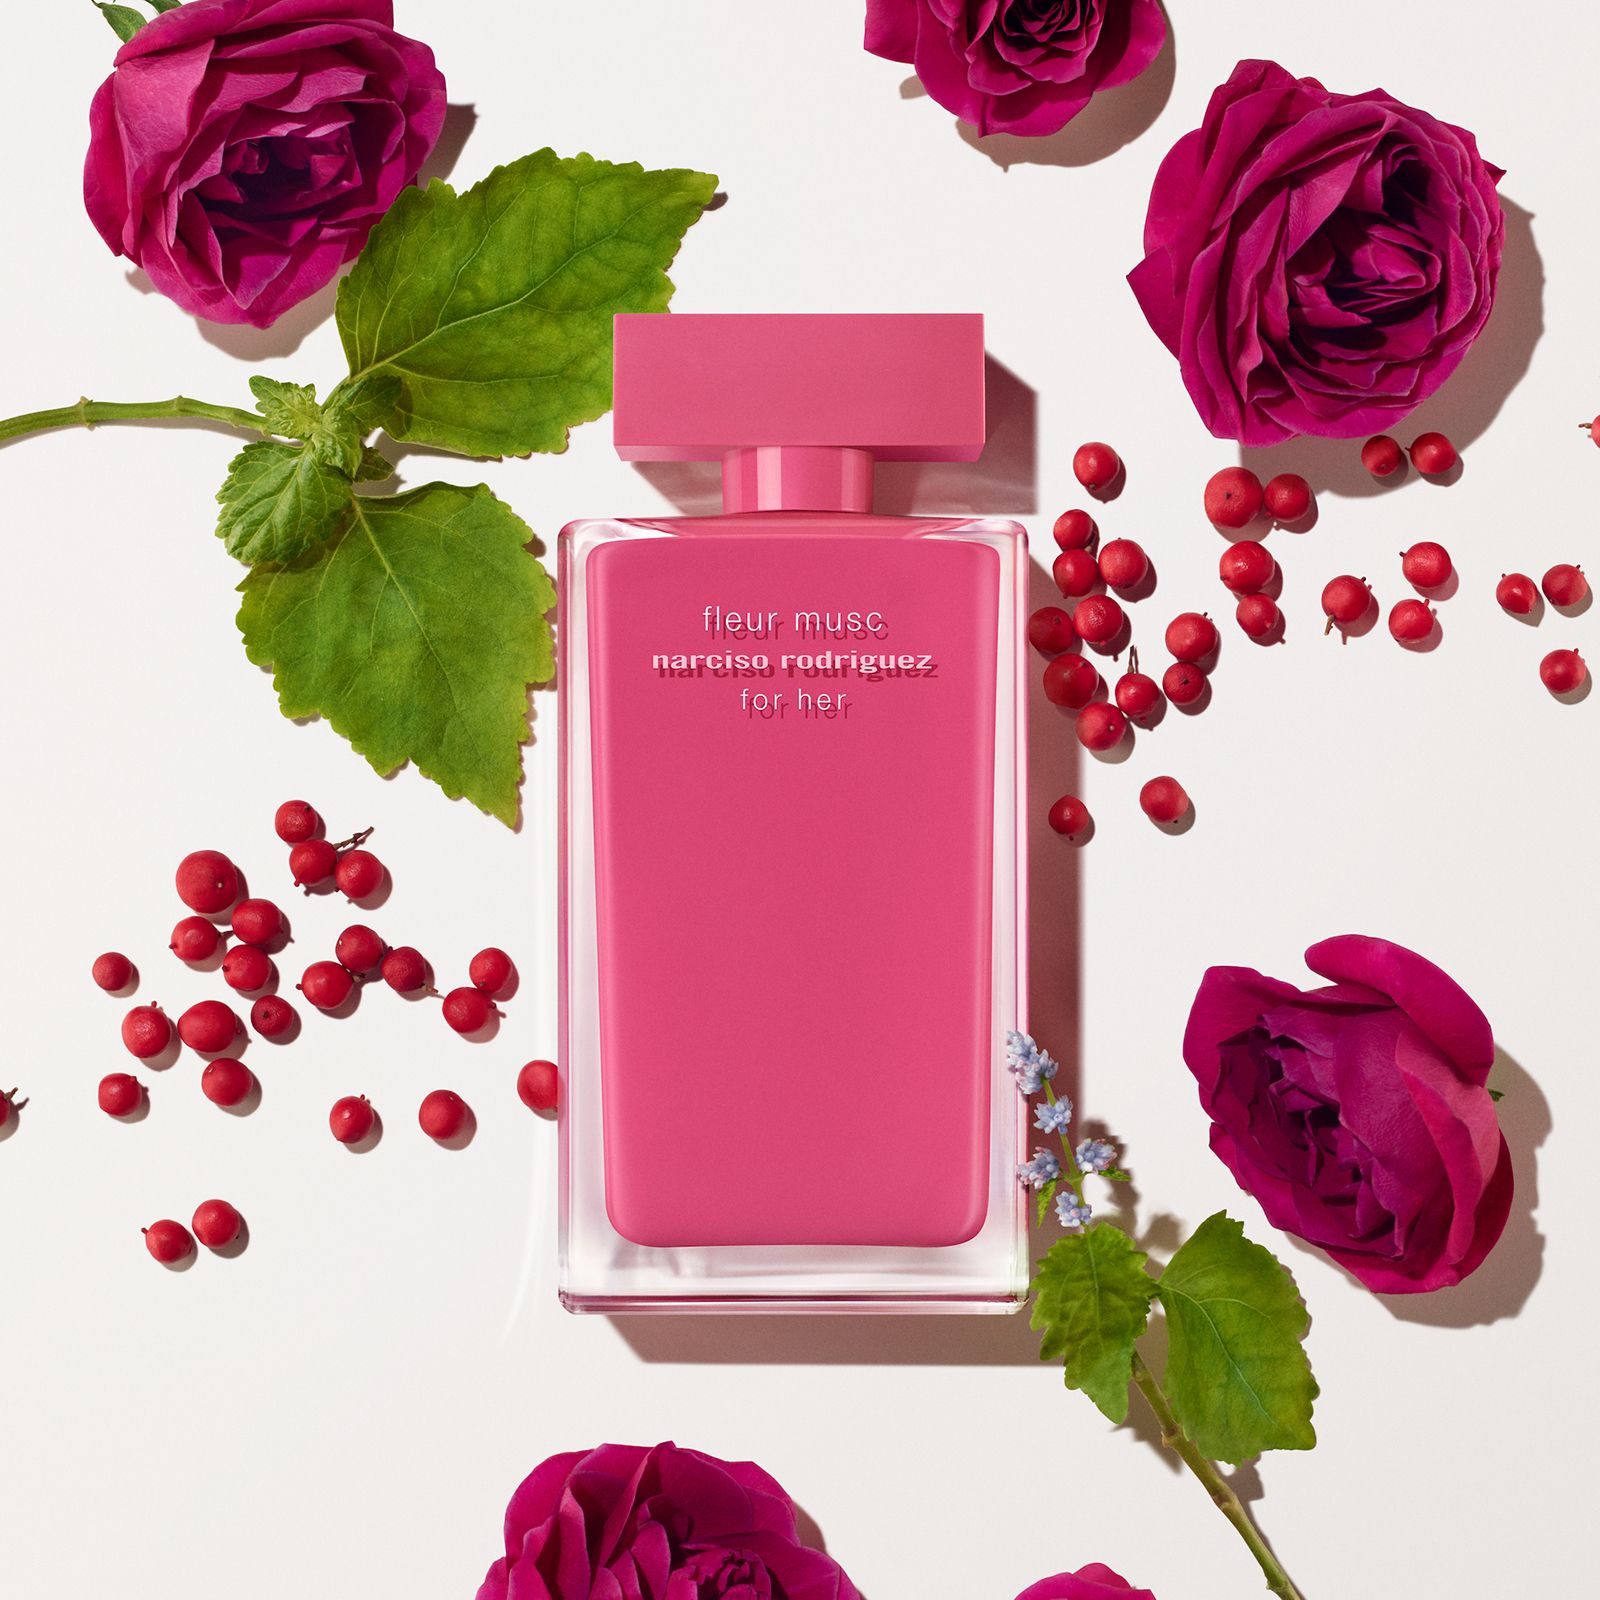 Флер муск. Narciso Rodriguez for her fleur Musc EDP 100ml. Narciso Rodriguez fleur Musc 100 мл. Narciso Rodriguez for her fleur Musc EDP 50ml. Духи fleur Musc Narciso Rodriguez for her.